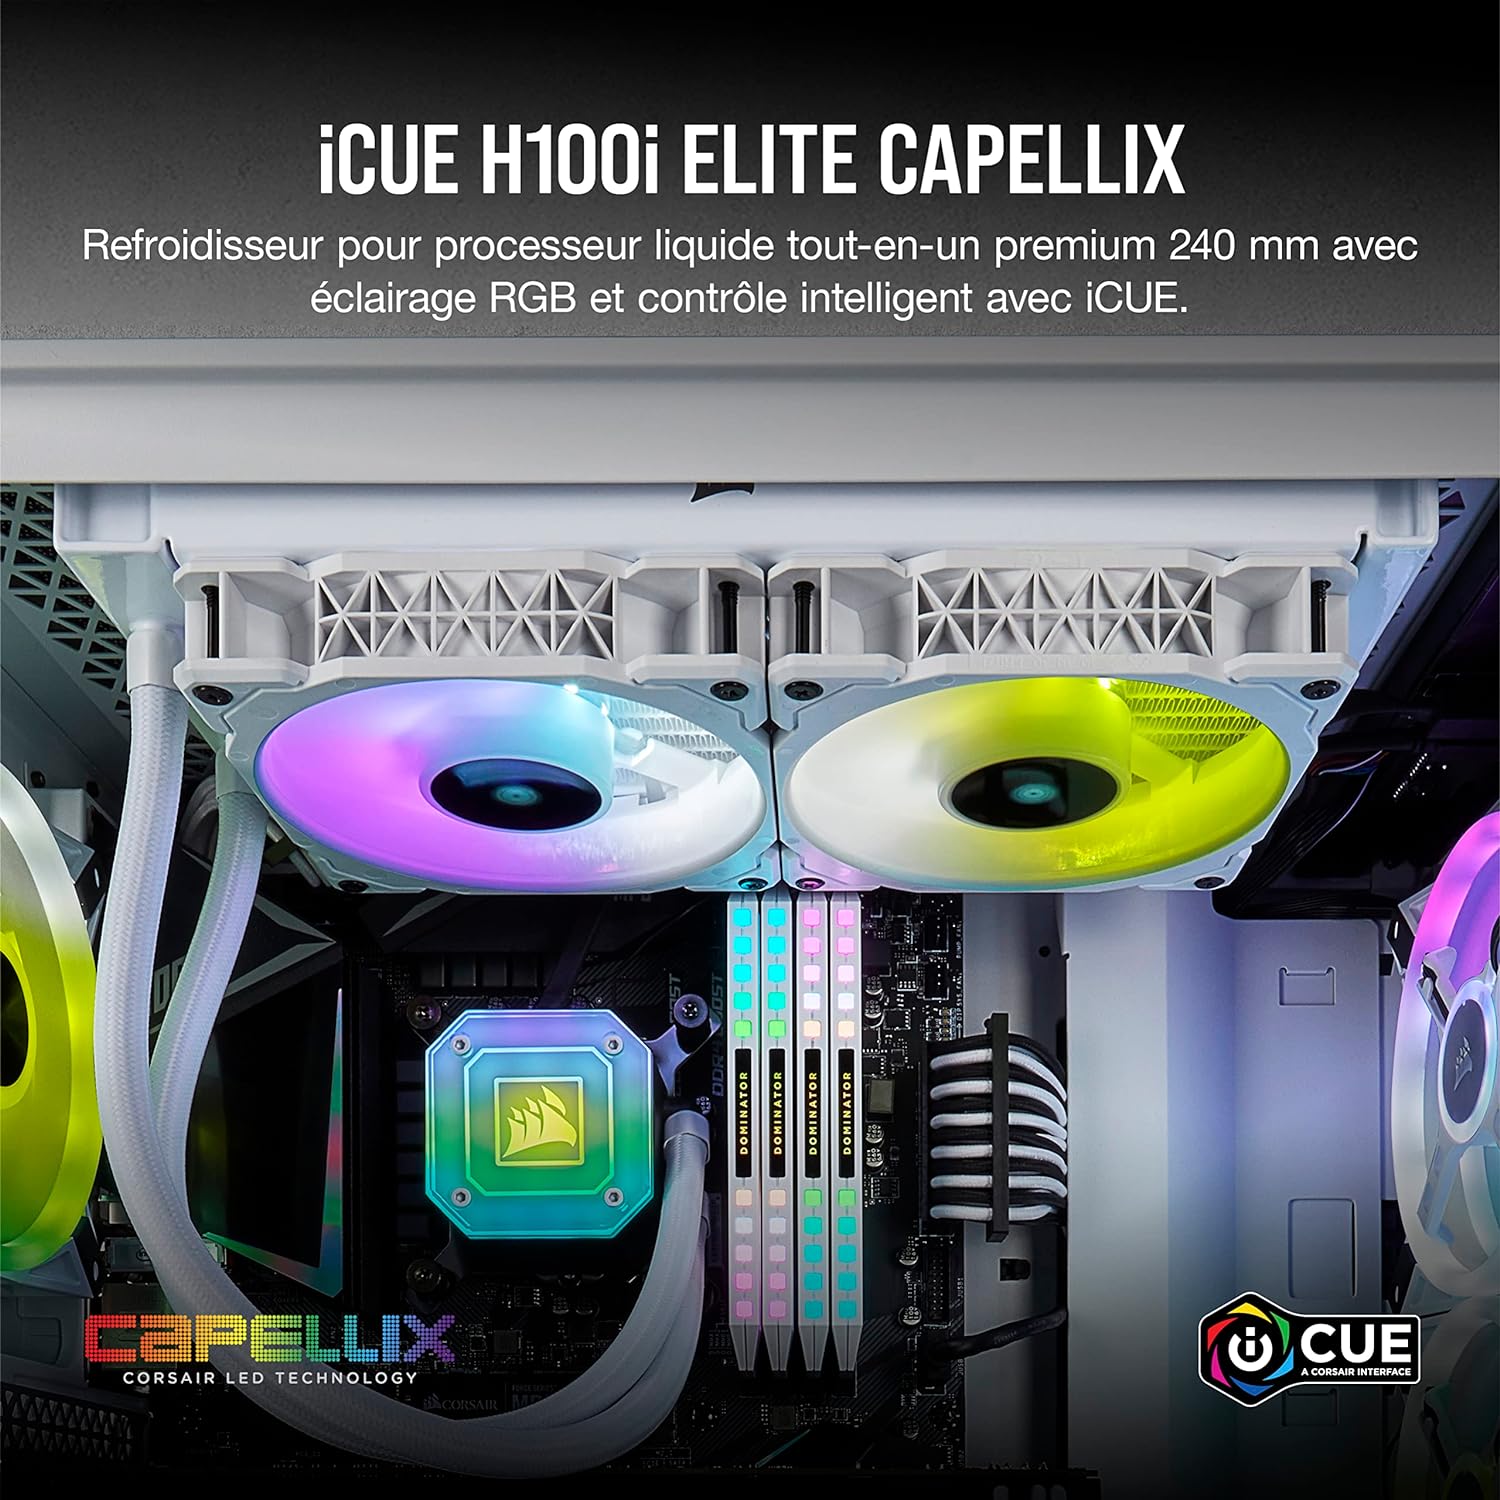 Corsair iCUE H100i Elite Capellix White - Smart RGB controller for precise fan speed and lighting control over six fans. 0840006630609